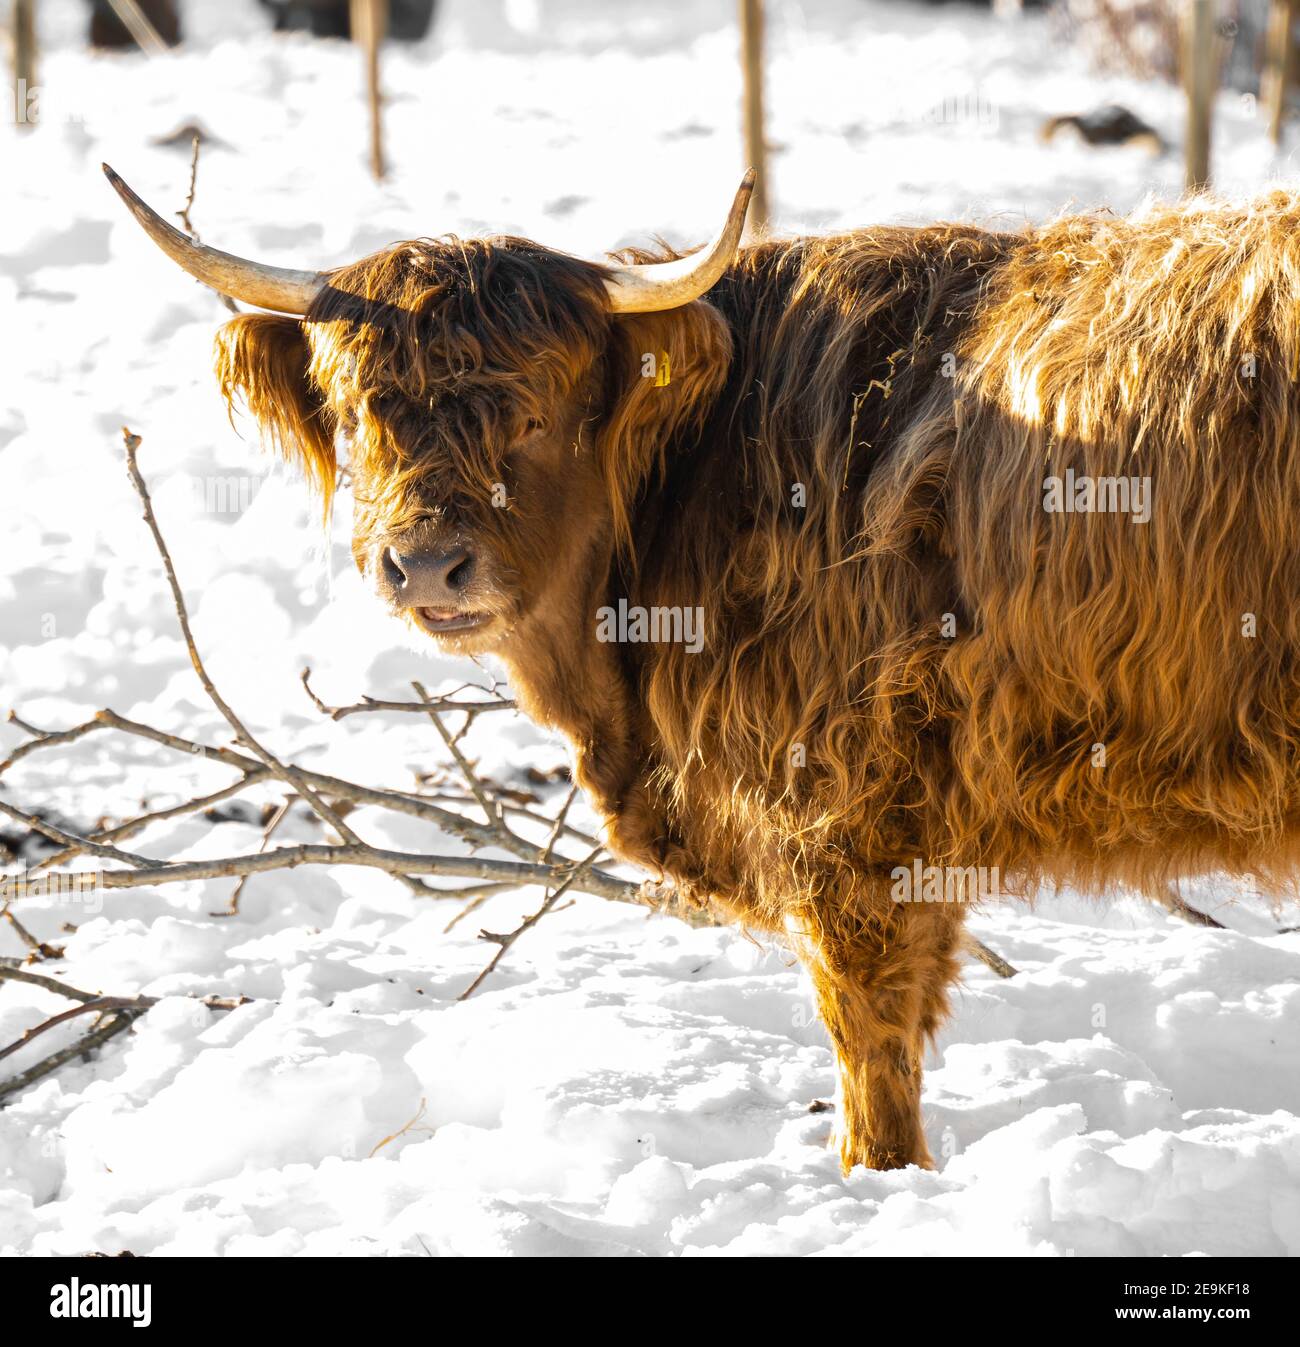 Scottish highland cow with long horns and ginger red fur. Stock Photo